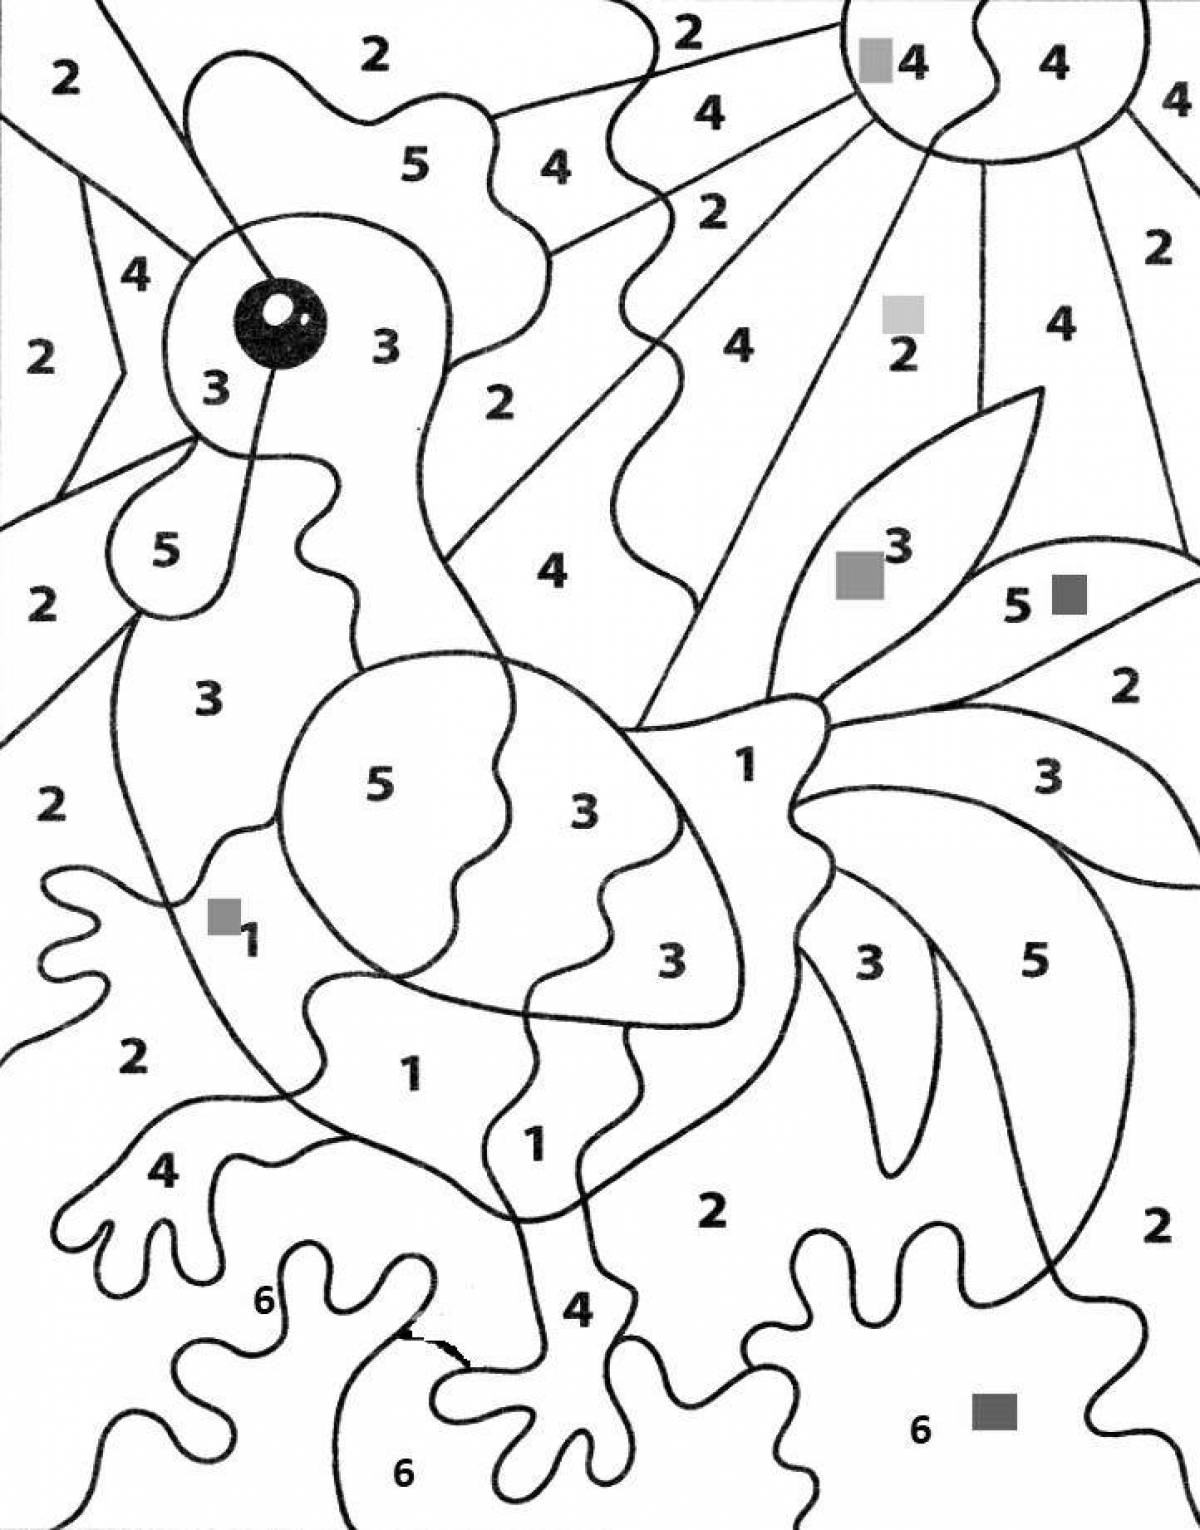 Easy-by-numbers fun coloring book